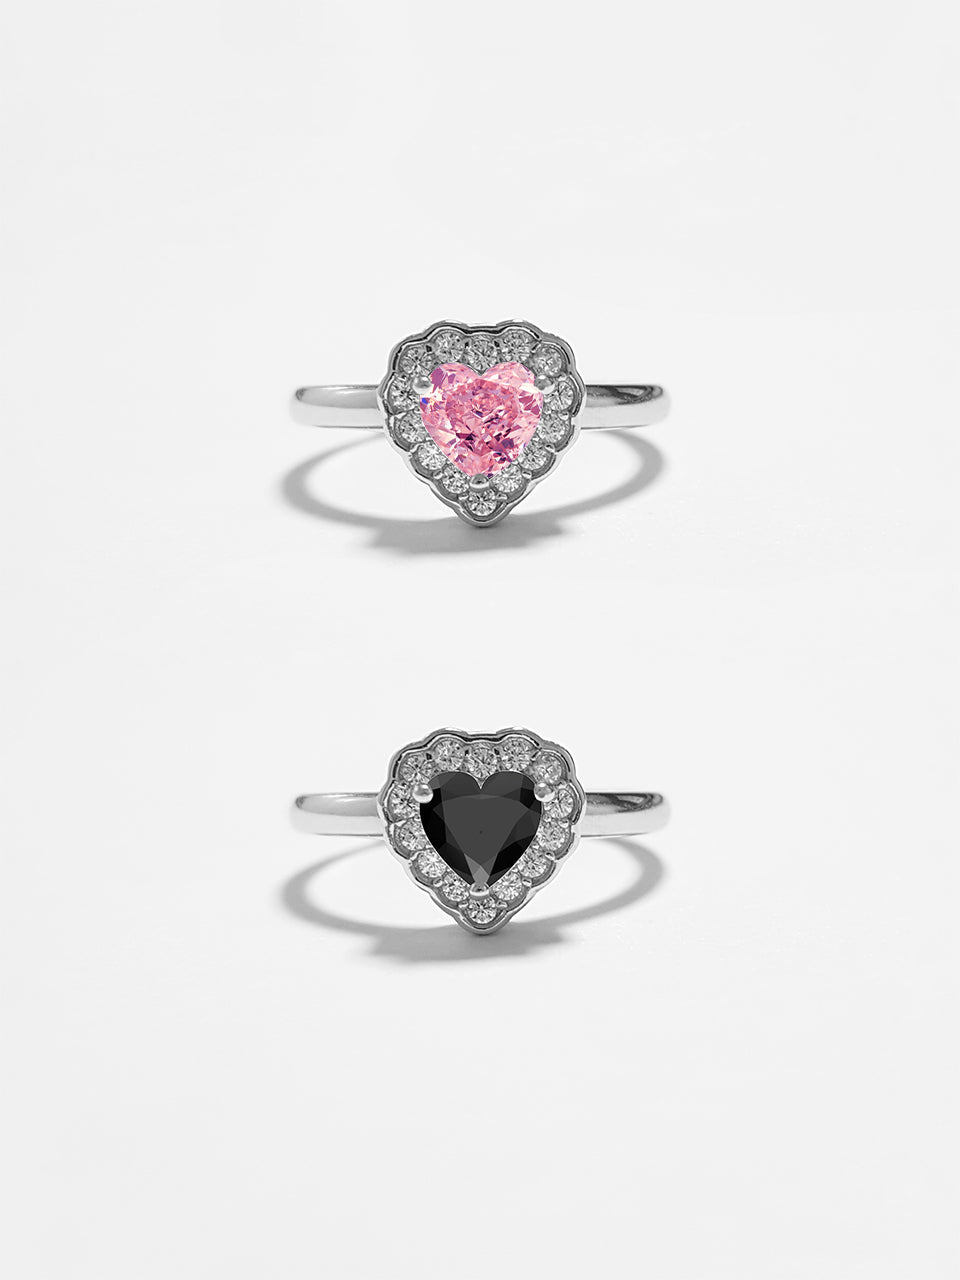 [Silver925] Moika Heart Ring (2COLORS)